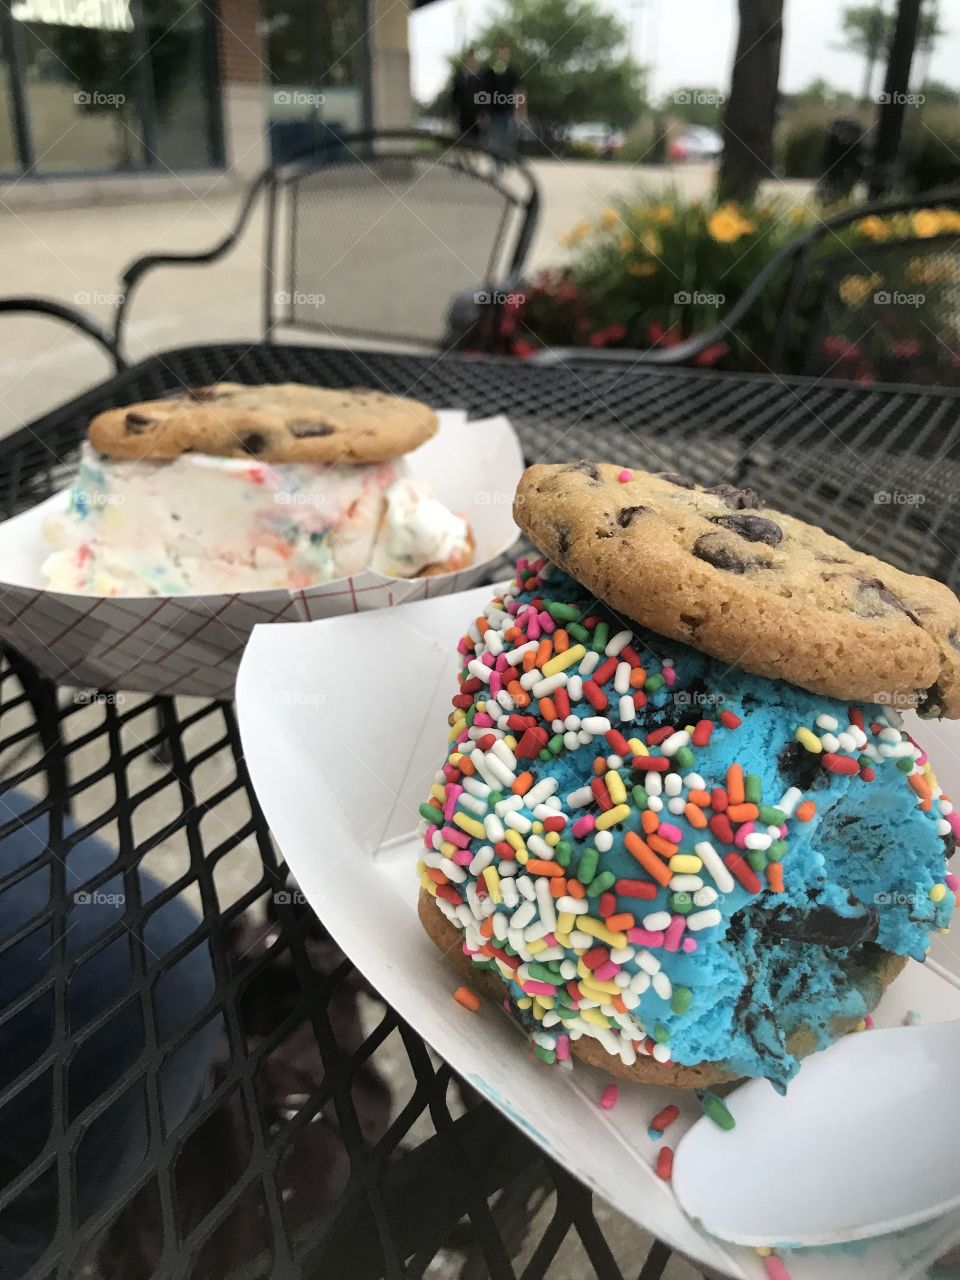 Enjoying a delicious dessert outside of a small shop. Tasty and so very colorful!